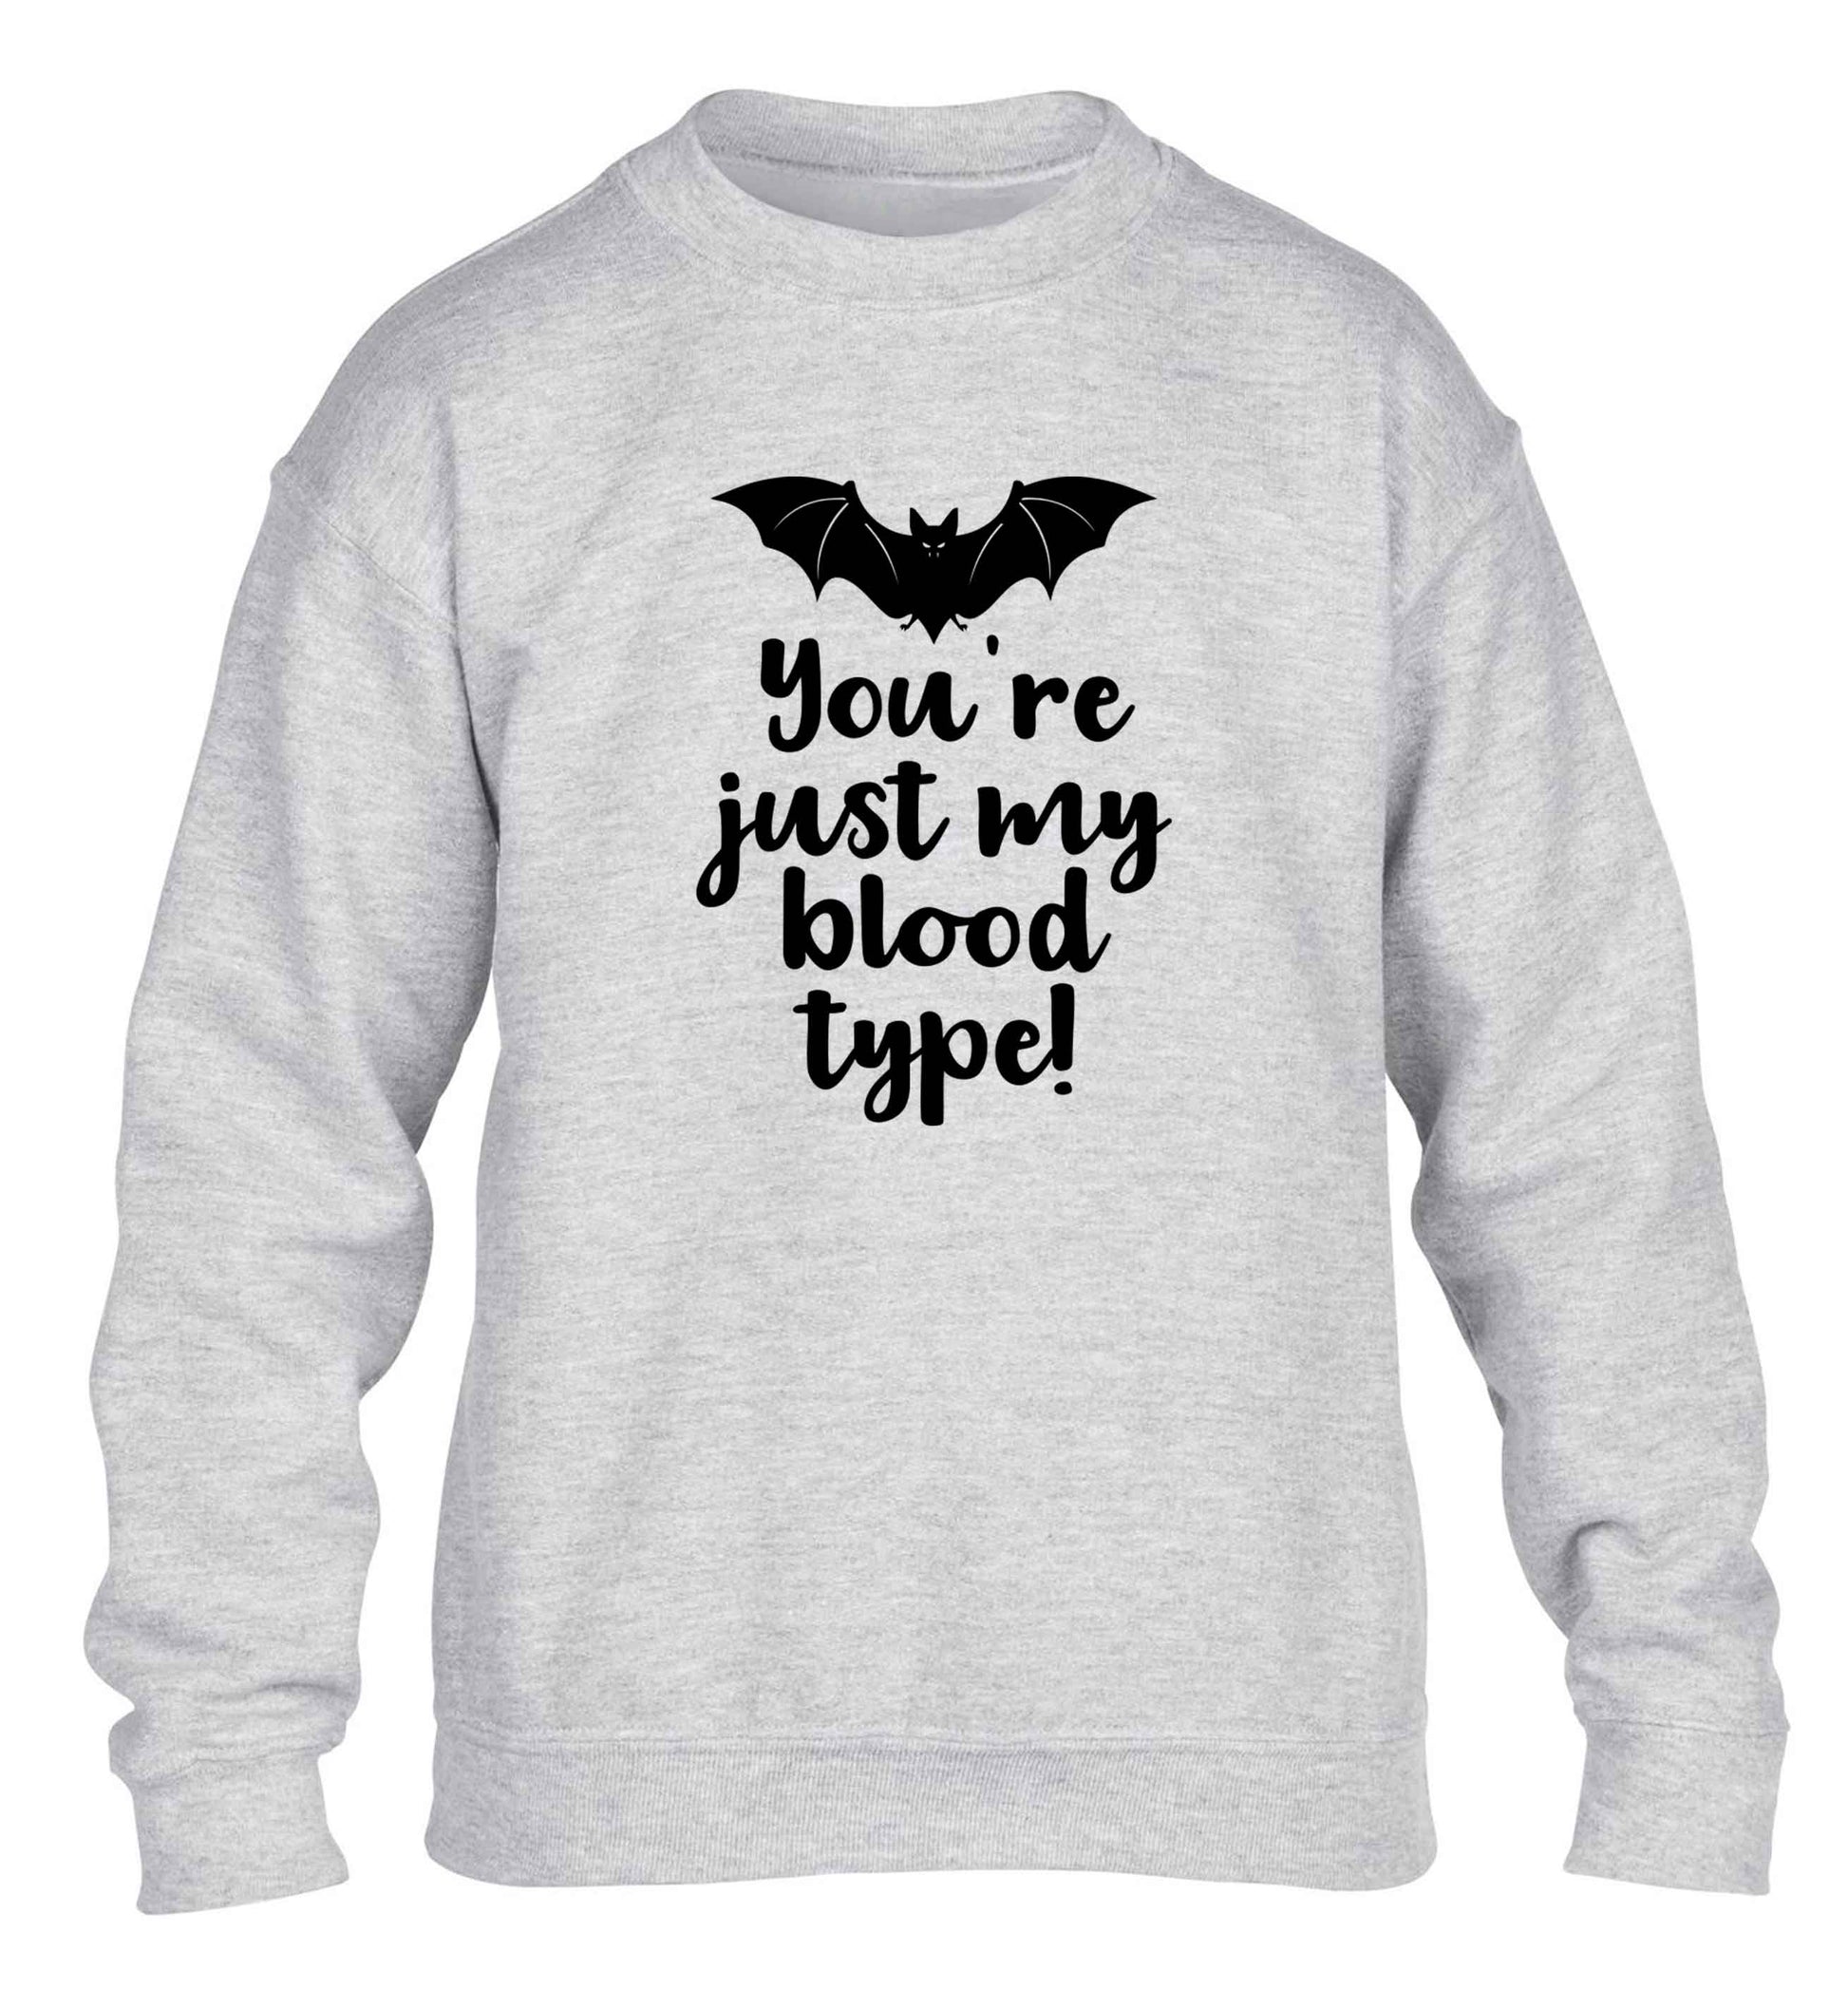 You're just my blood type children's grey sweater 12-13 Years